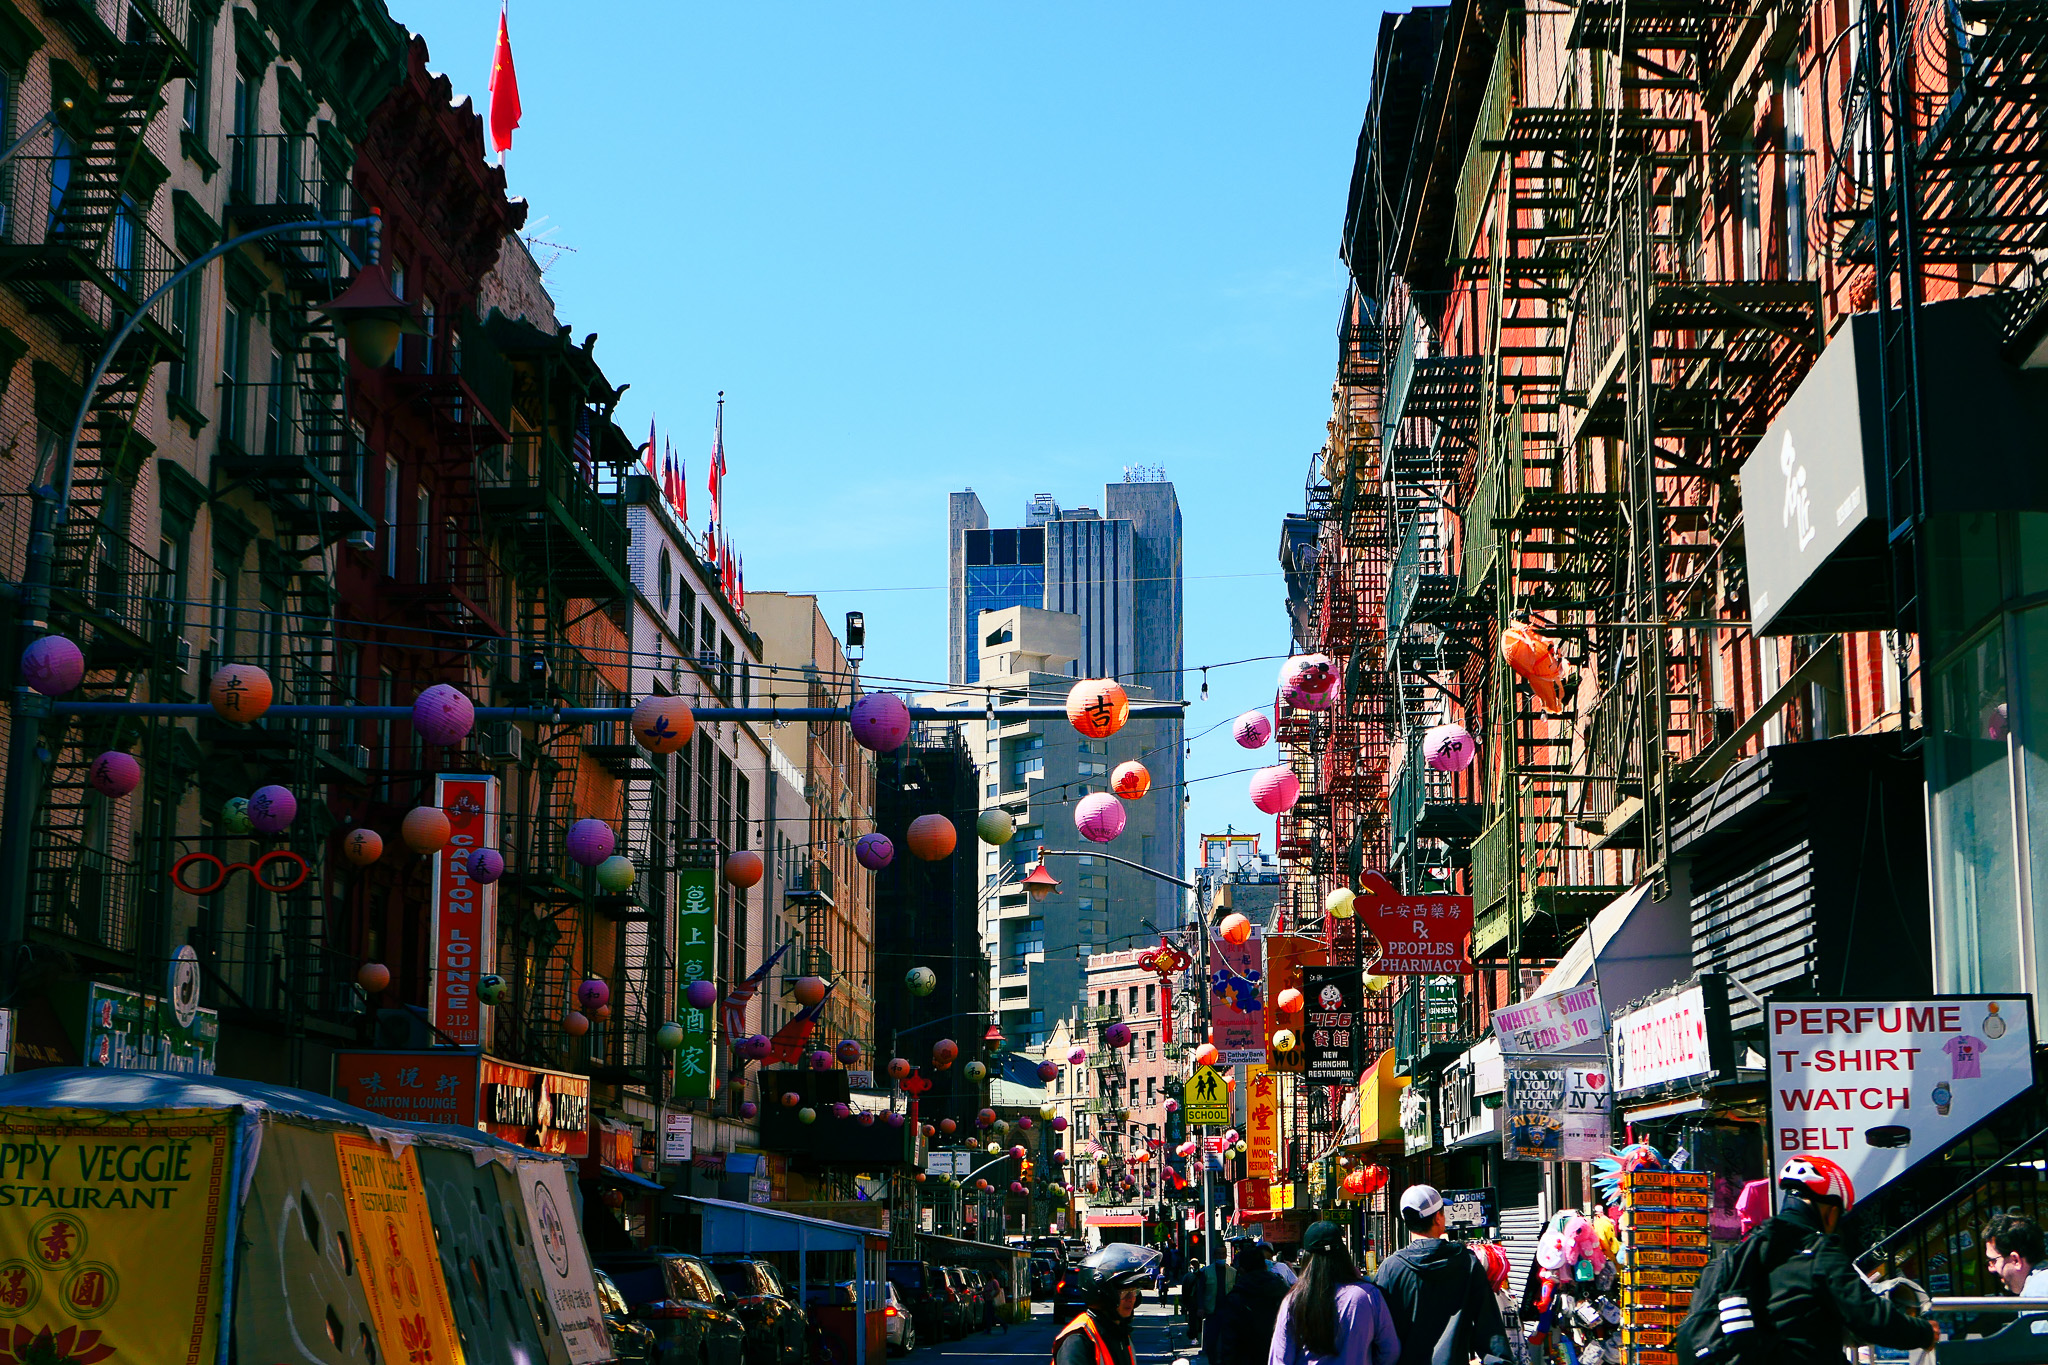 Visually busy shot of Mott Street in Manhattan Chinatown, flanked by rows of buildings with multiple colorful paper lanterns strung between them